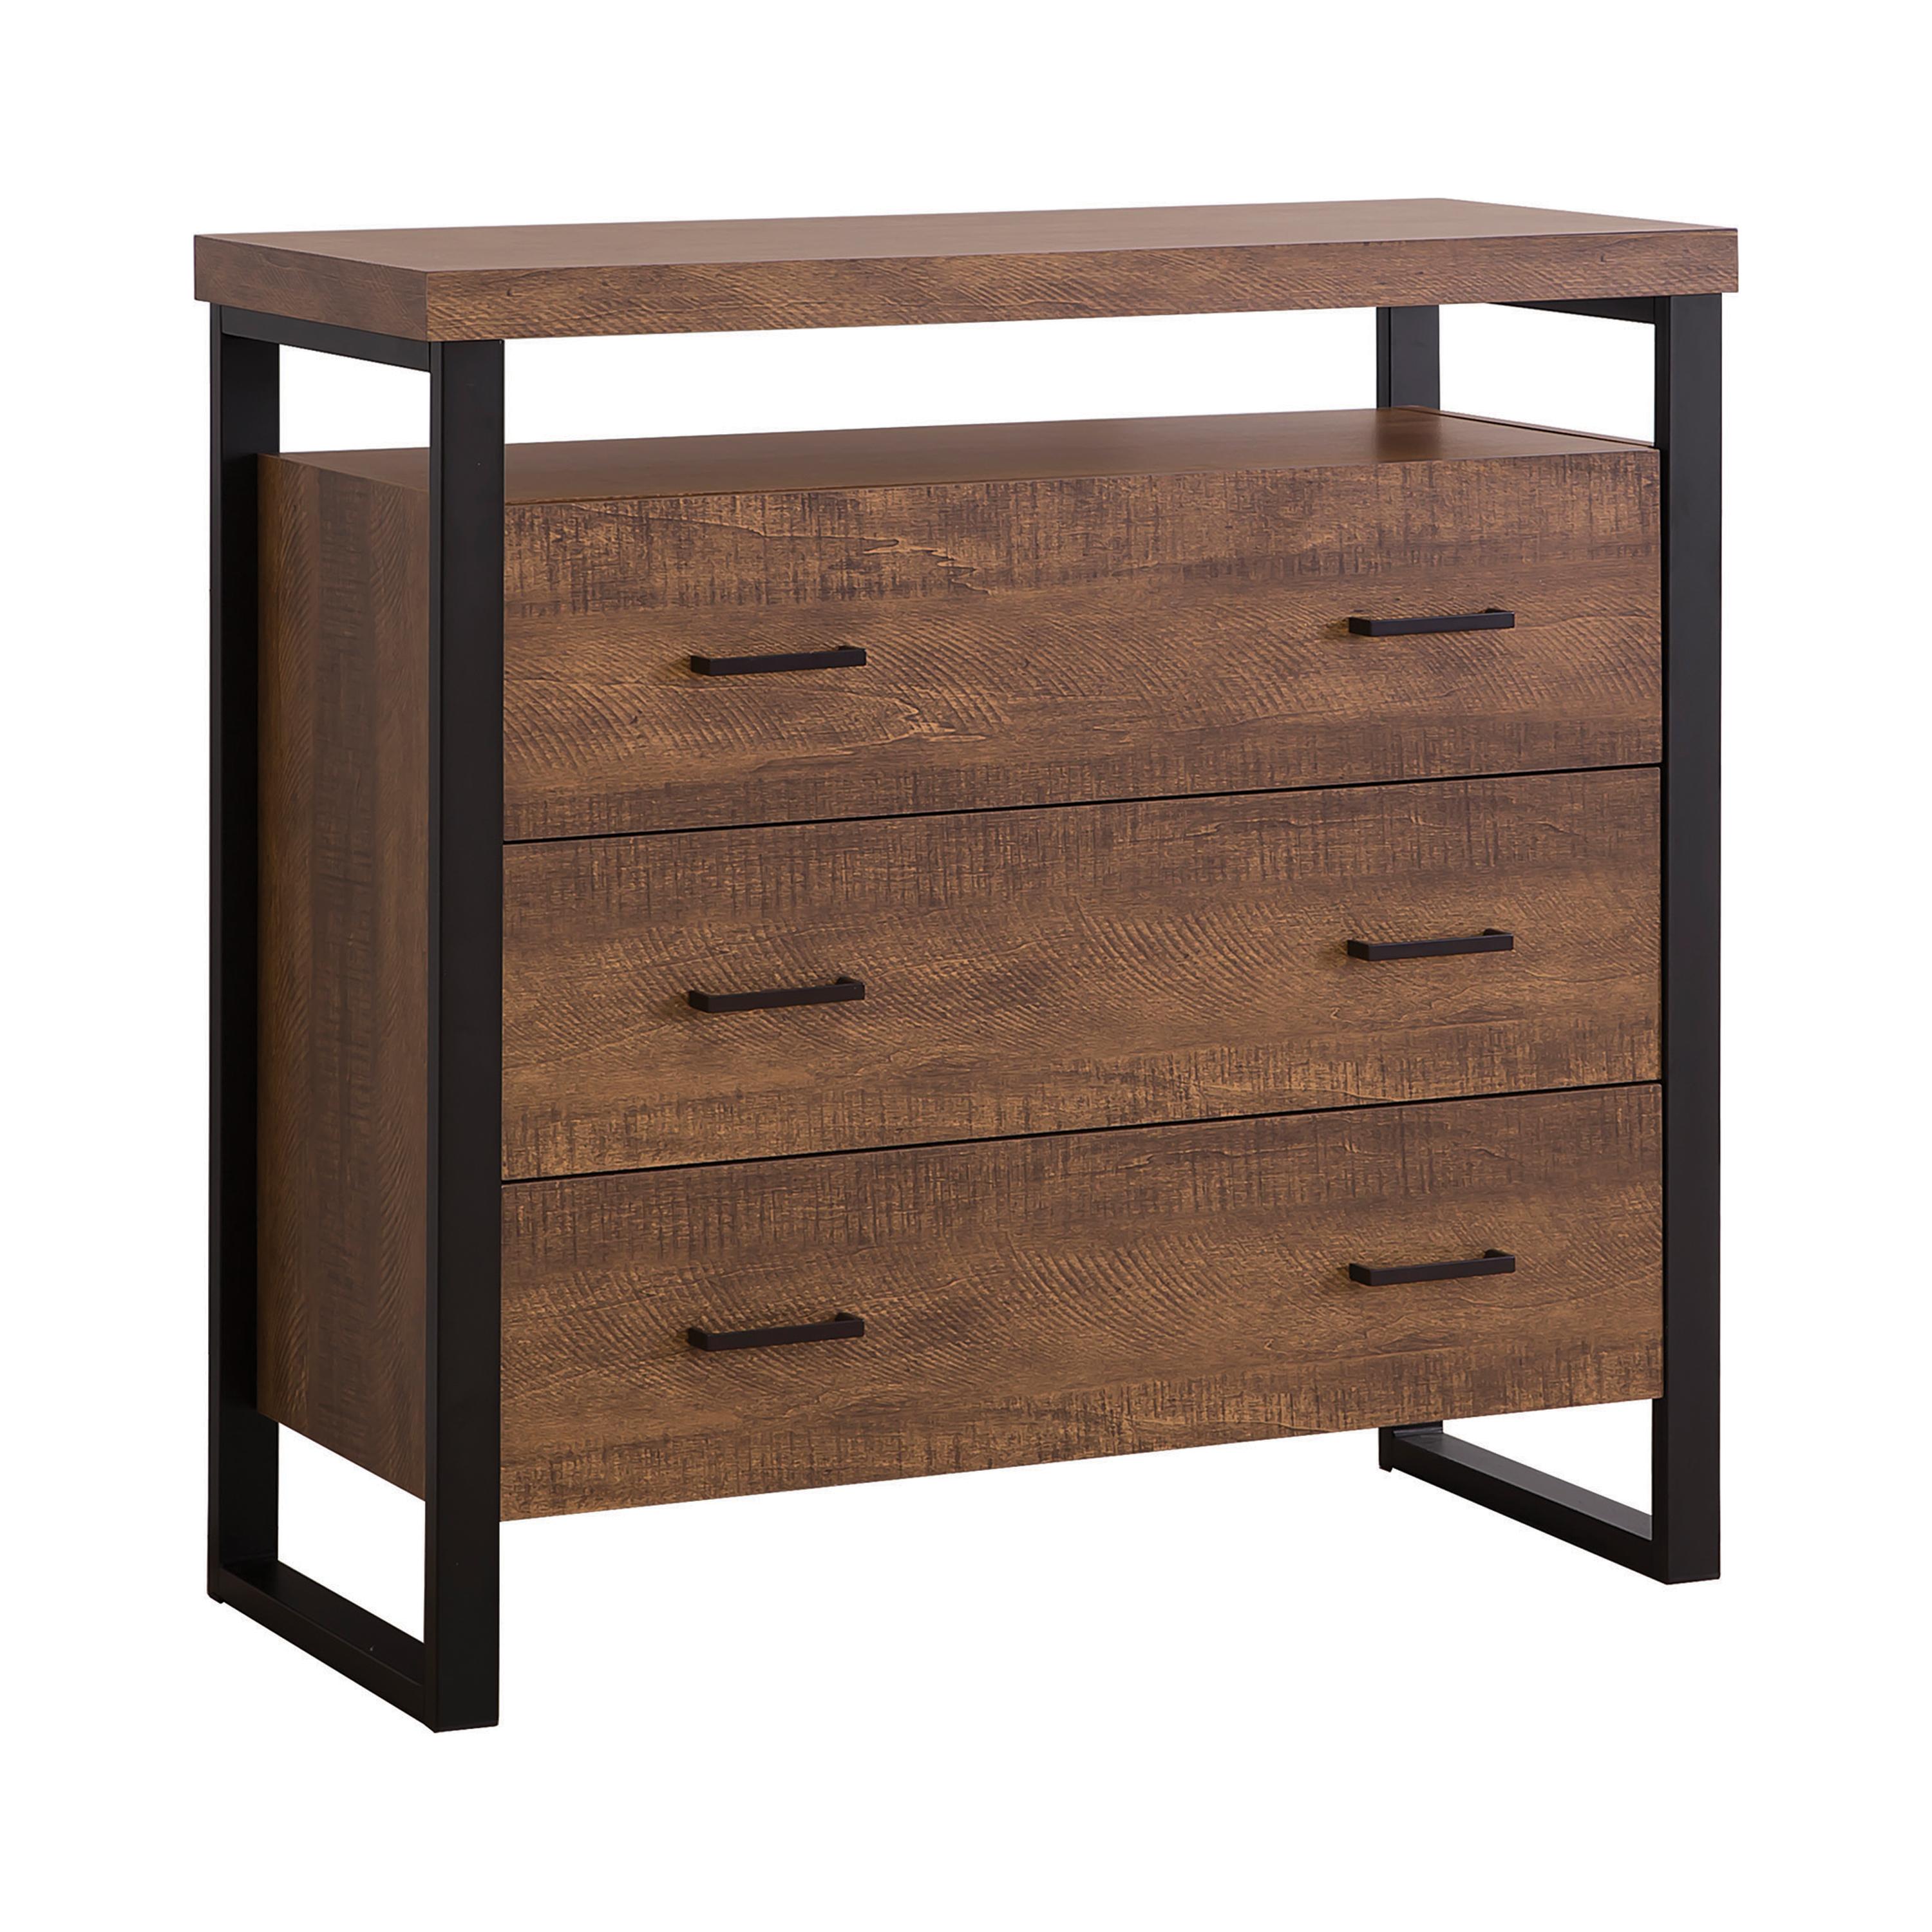 Rustic Accent Cabinet 902762 902762 in Amber 